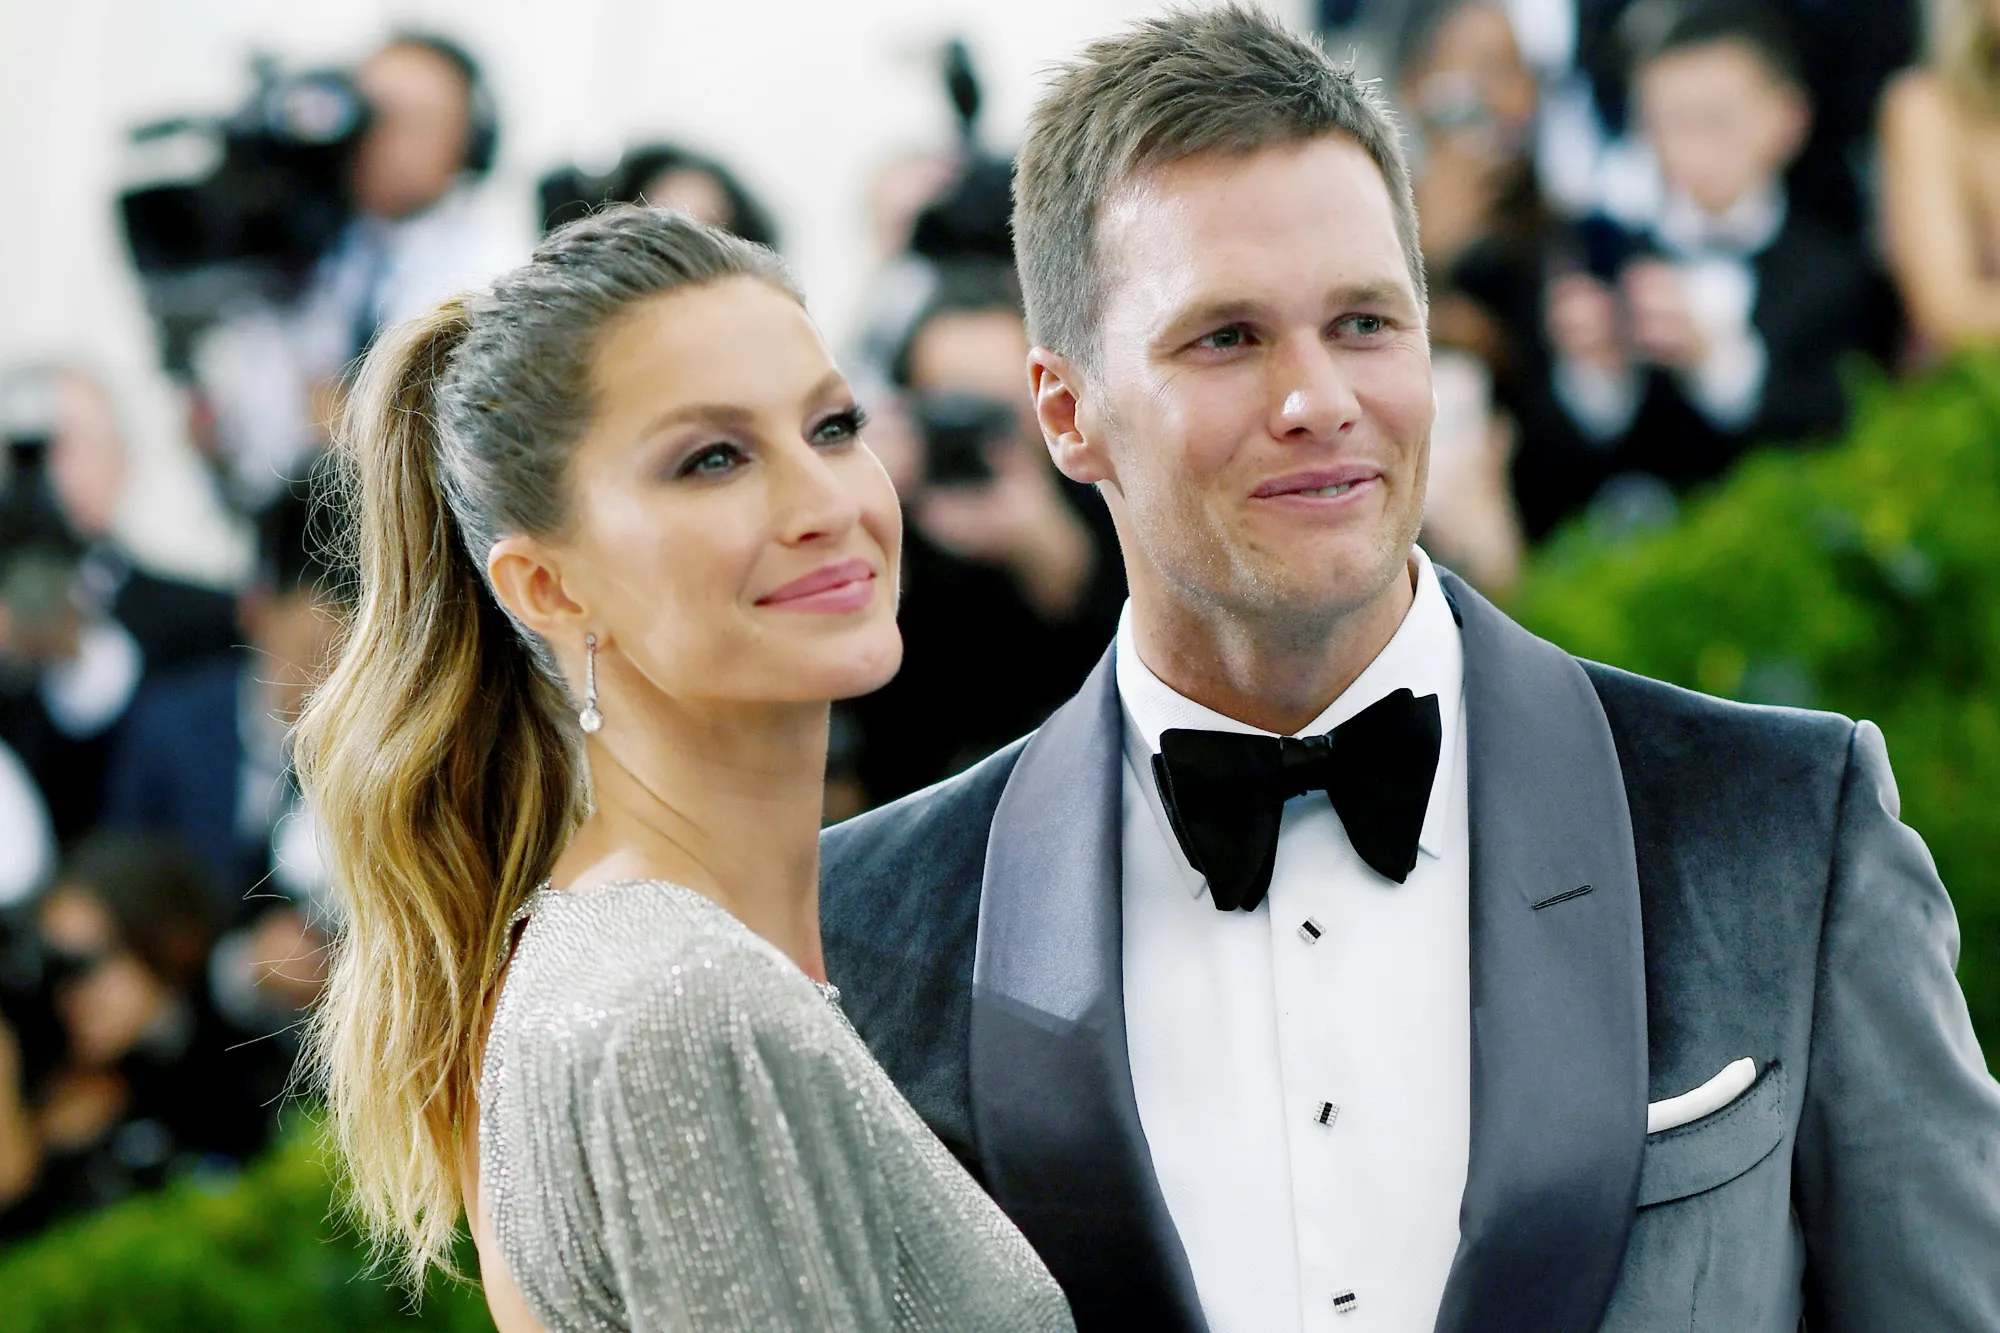 Tom Brady and Gisele Bundchen are 'working through things' amid divorce  rumors after he unretired